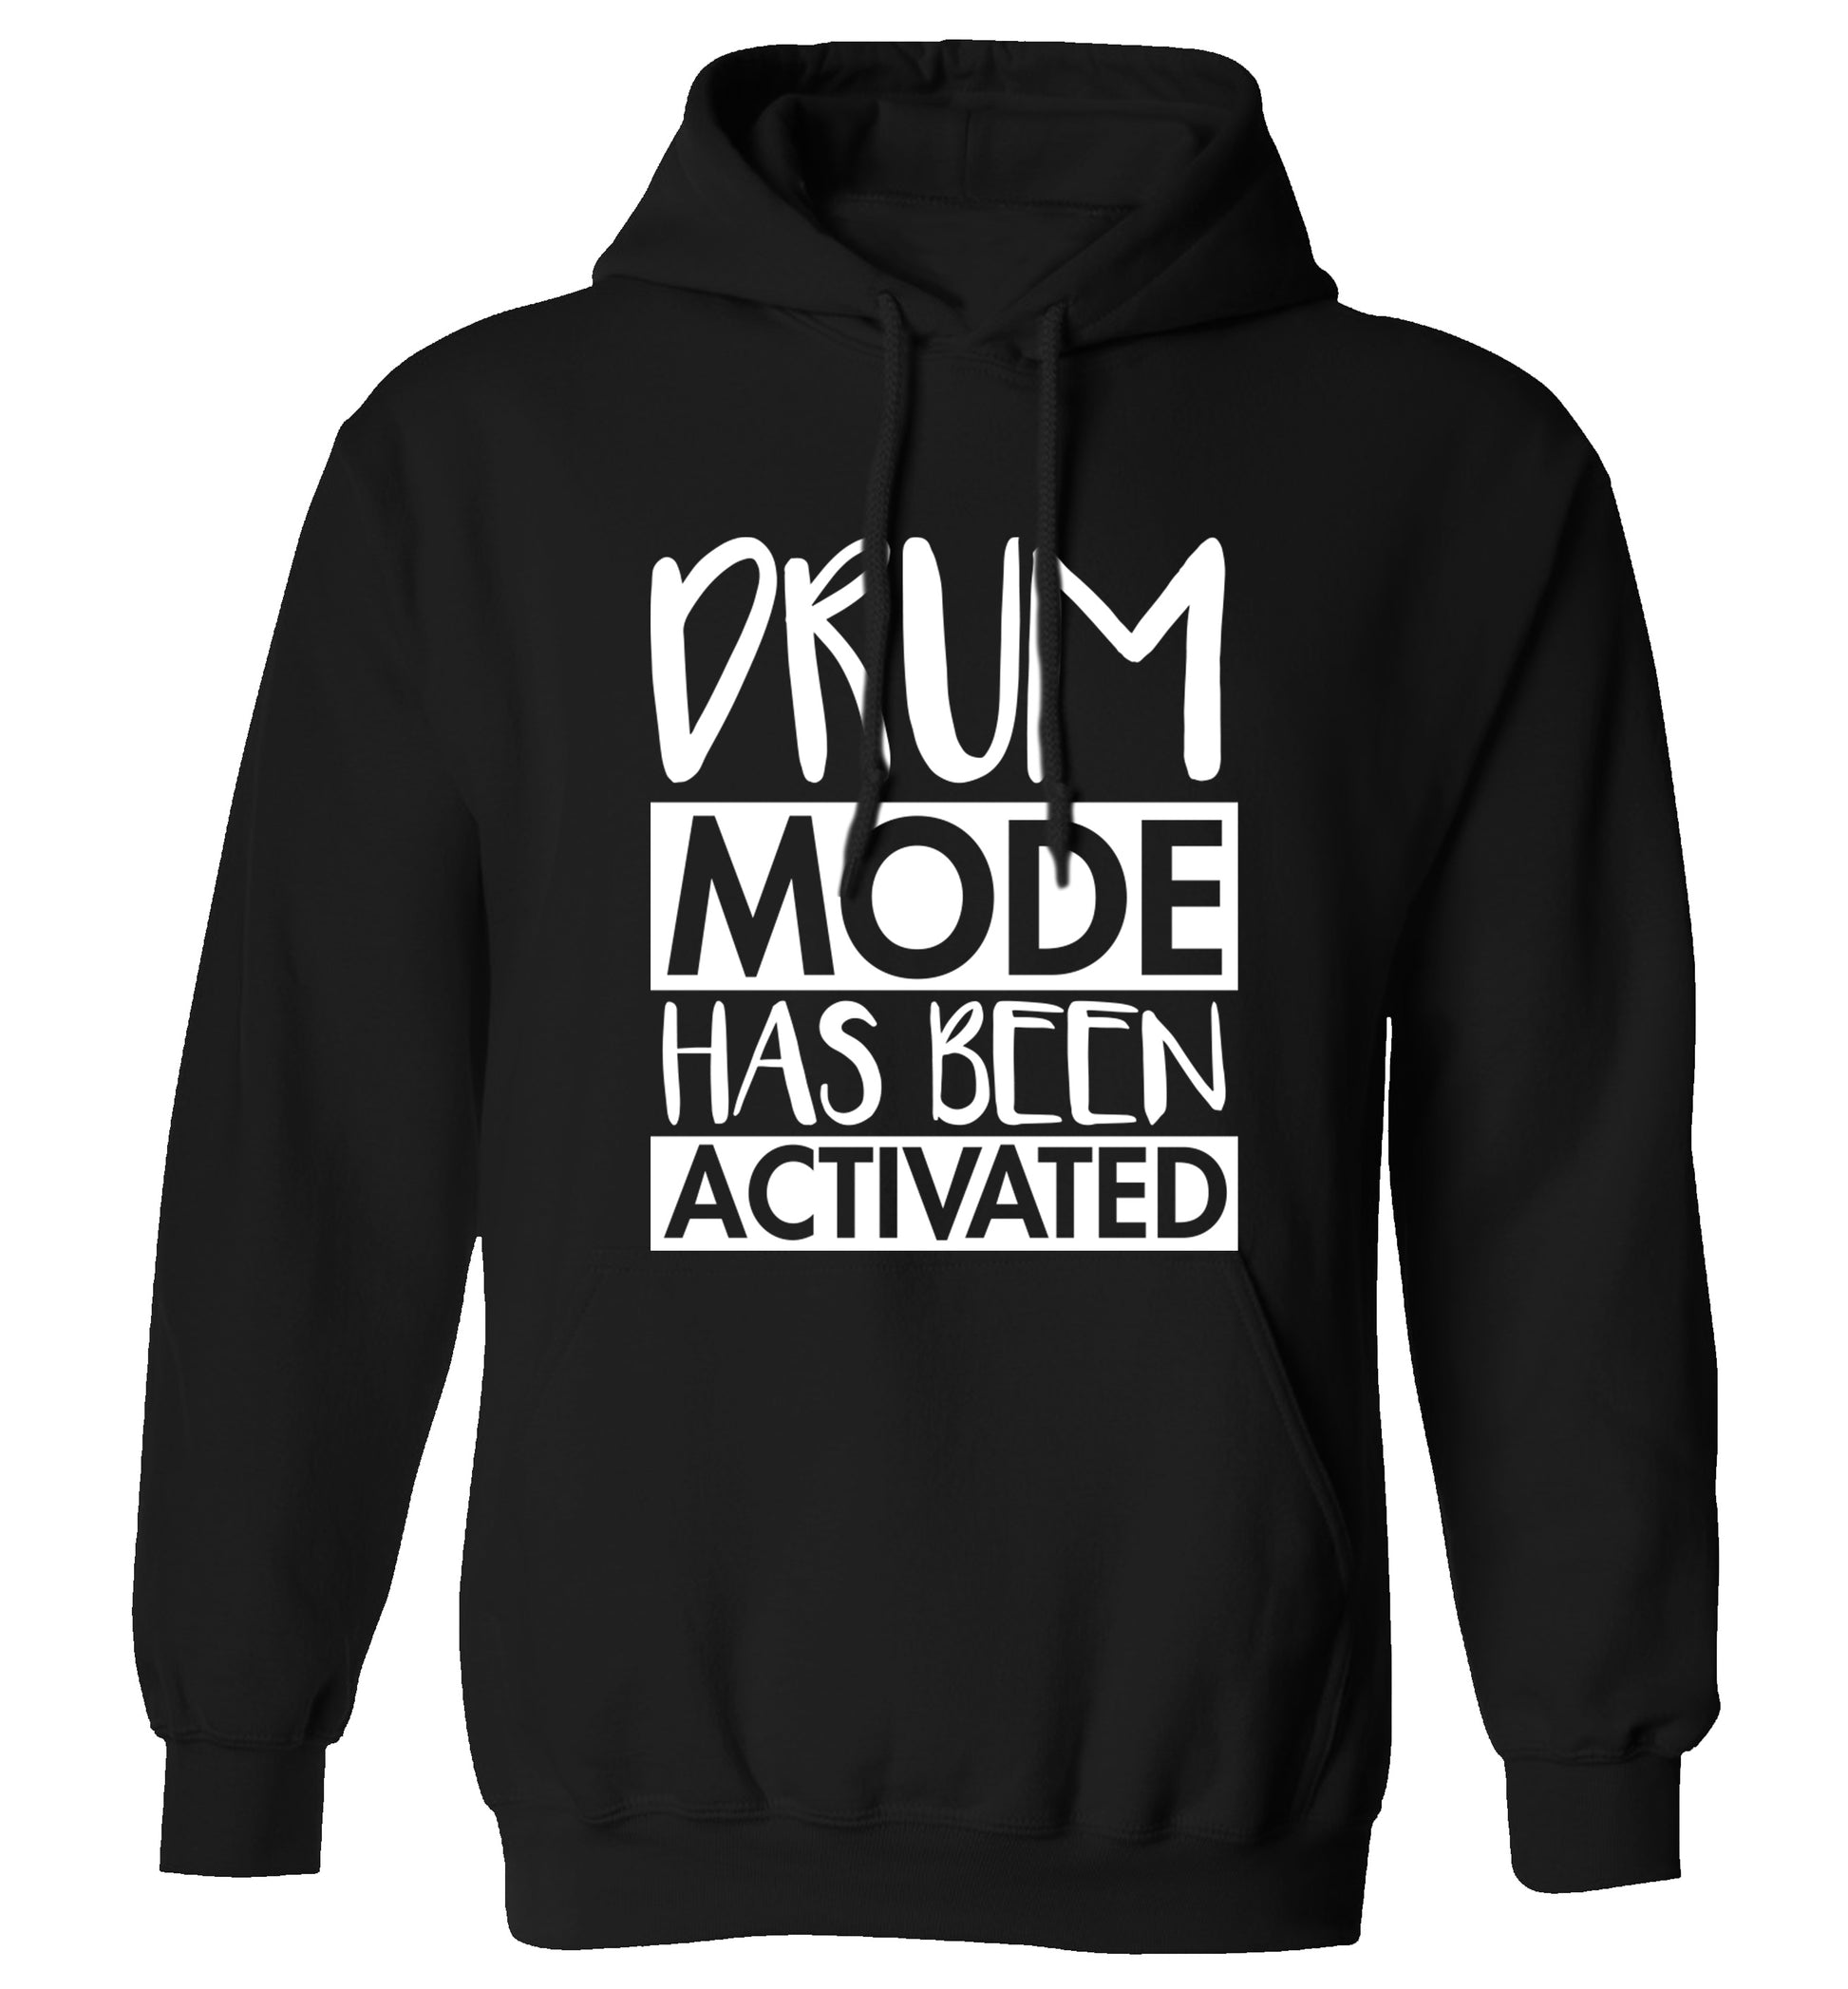 Drum mode activated adults unisexblack hoodie 2XL